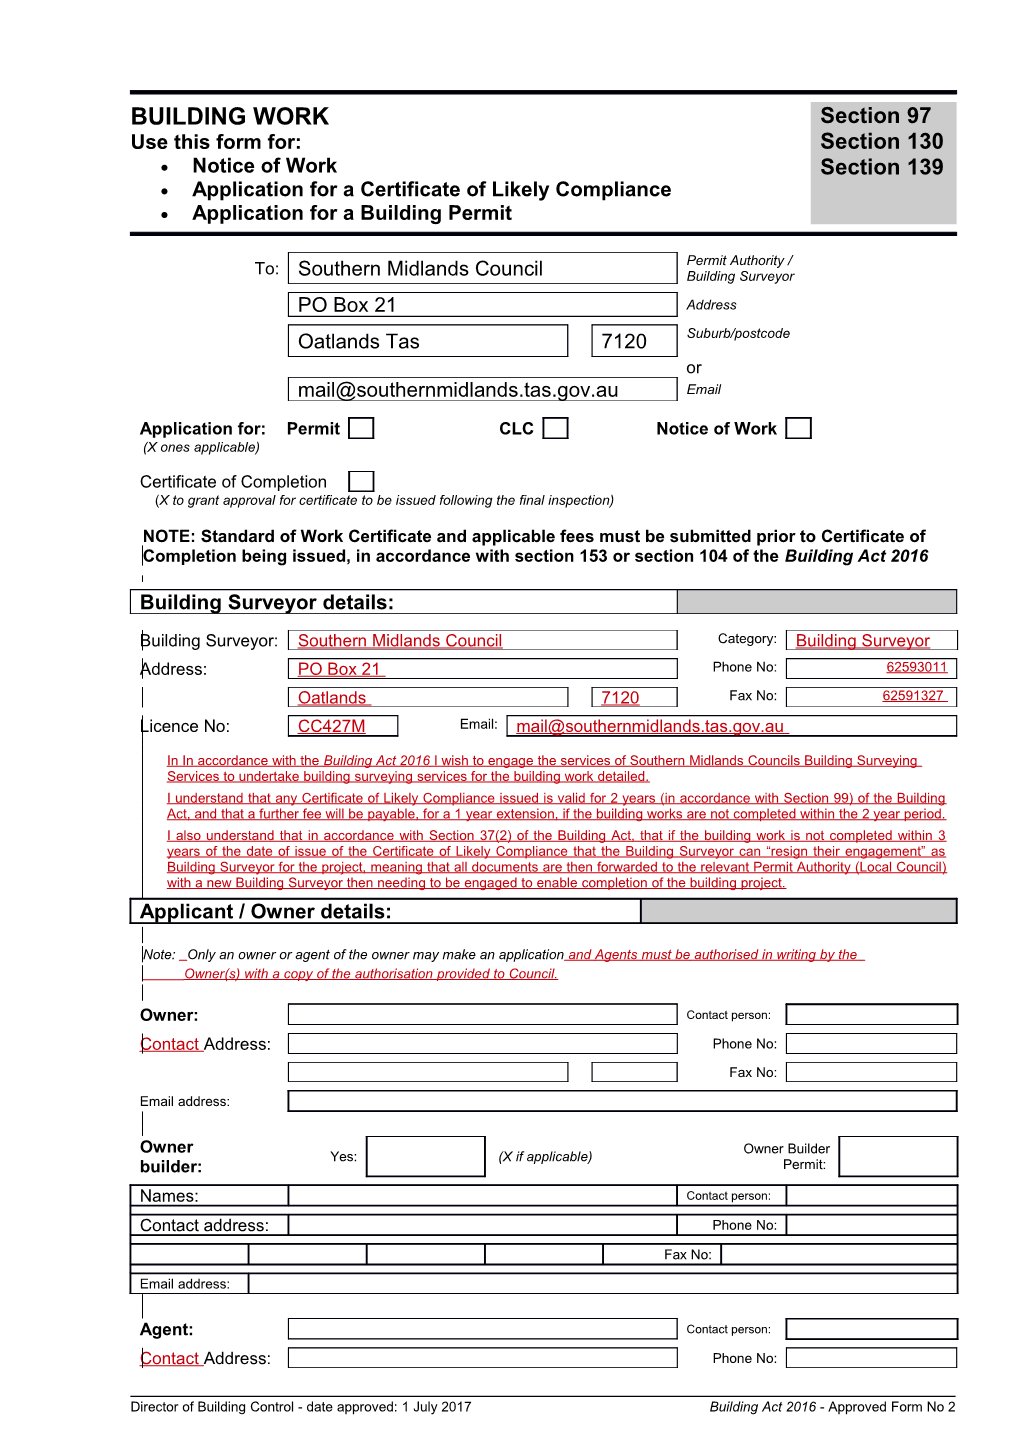 Application for Building Permit Form 2